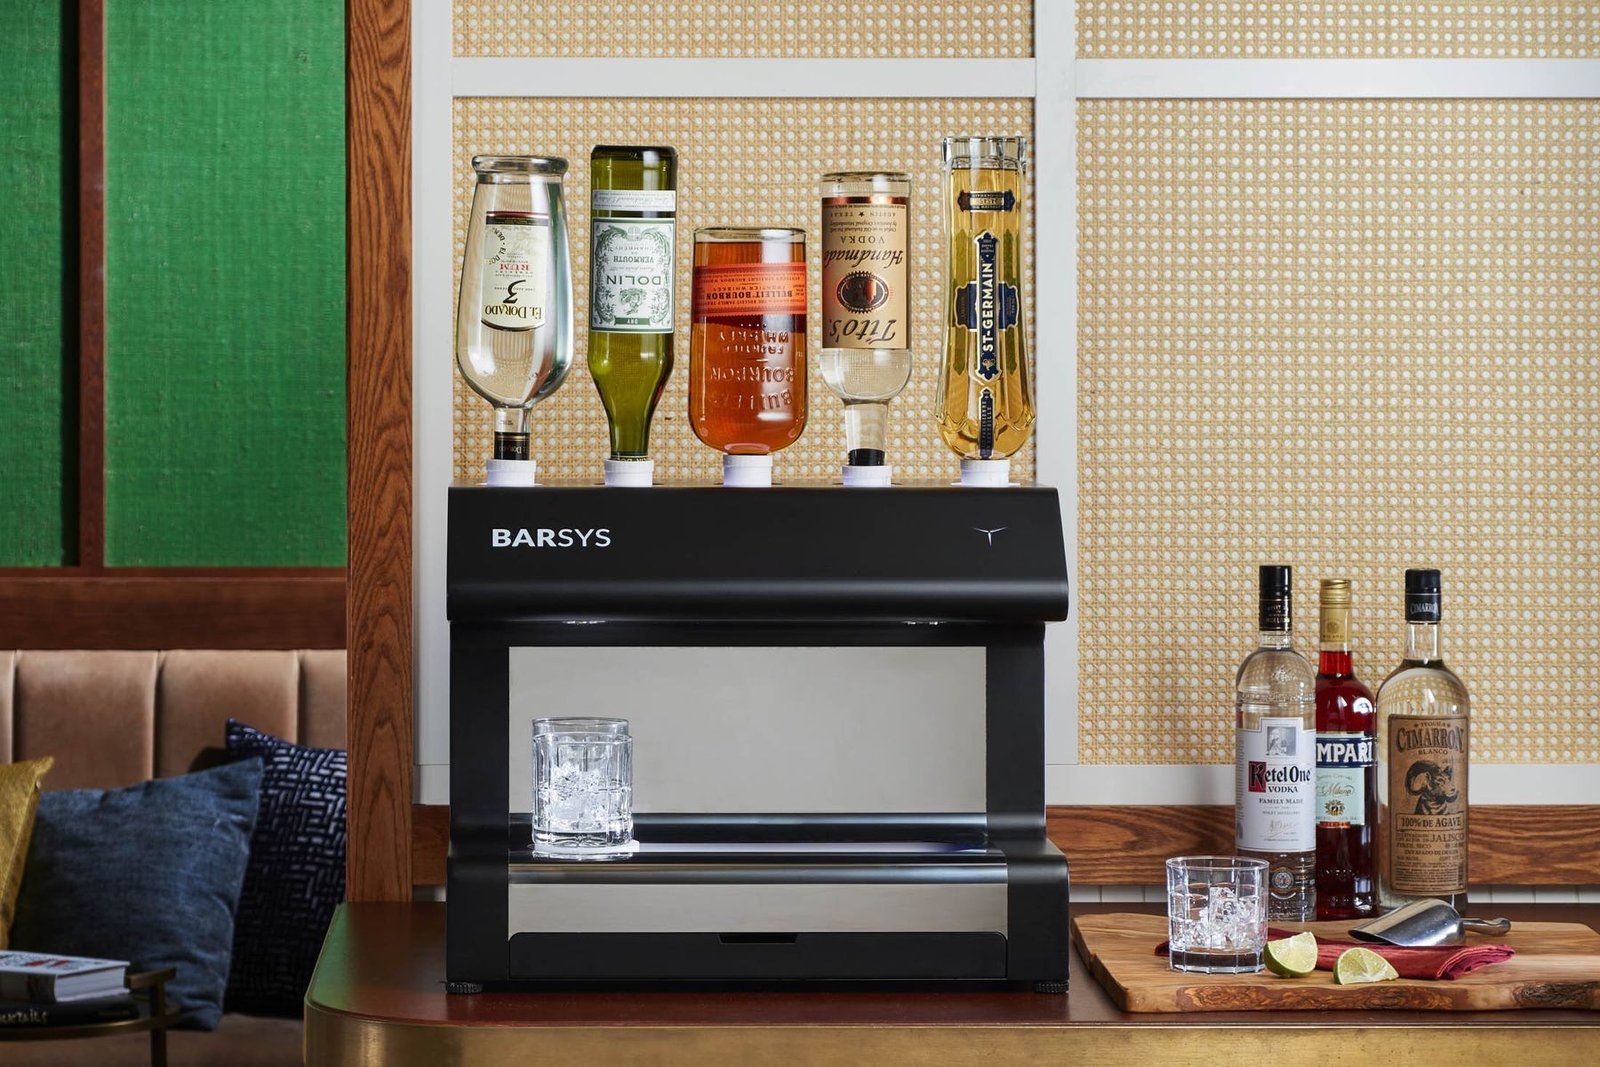 Who Doesn’t Want A Robot Bartender That Sits On Your Countertop?